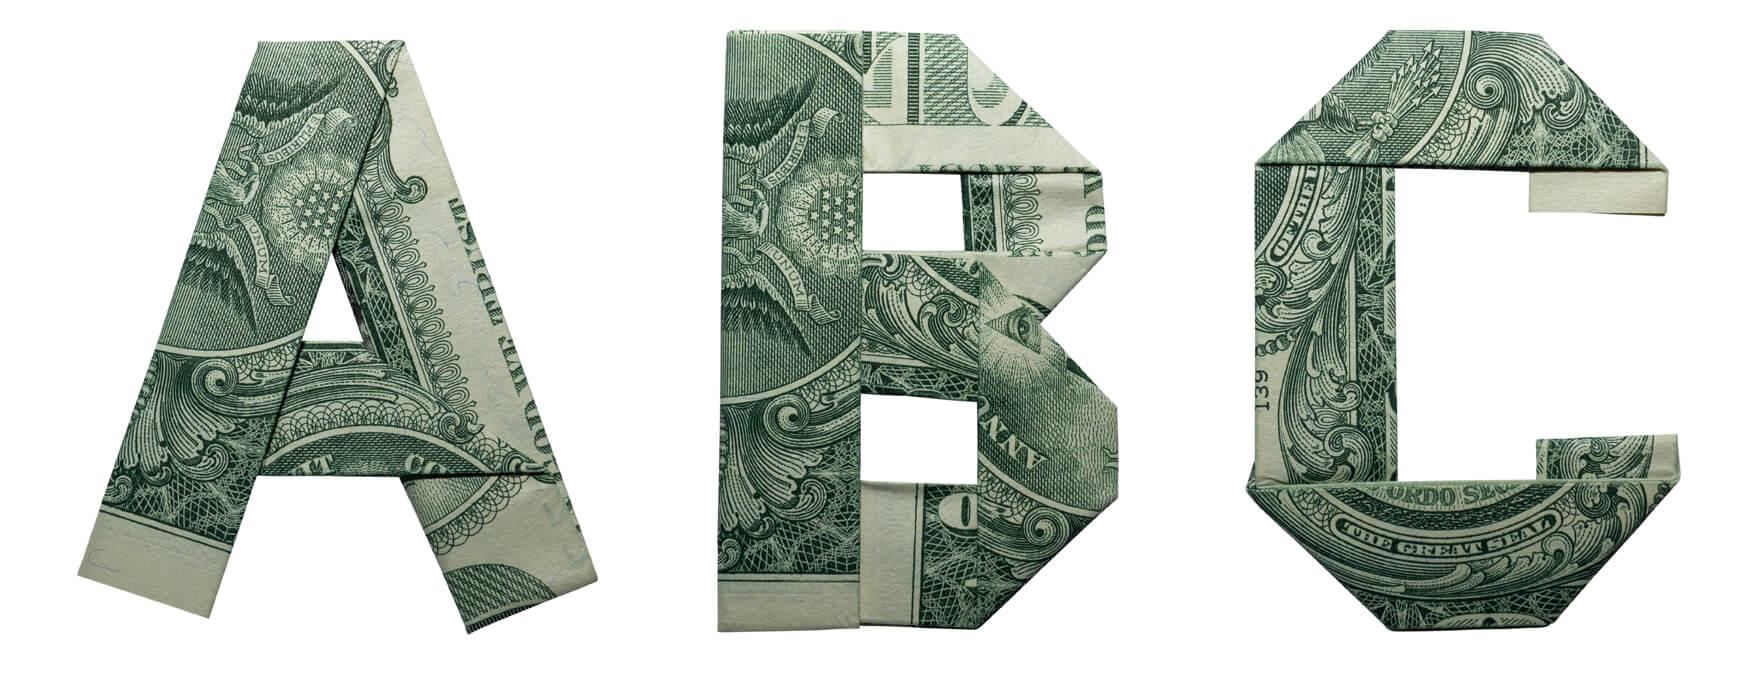 ABC made of cash folded into origami letters